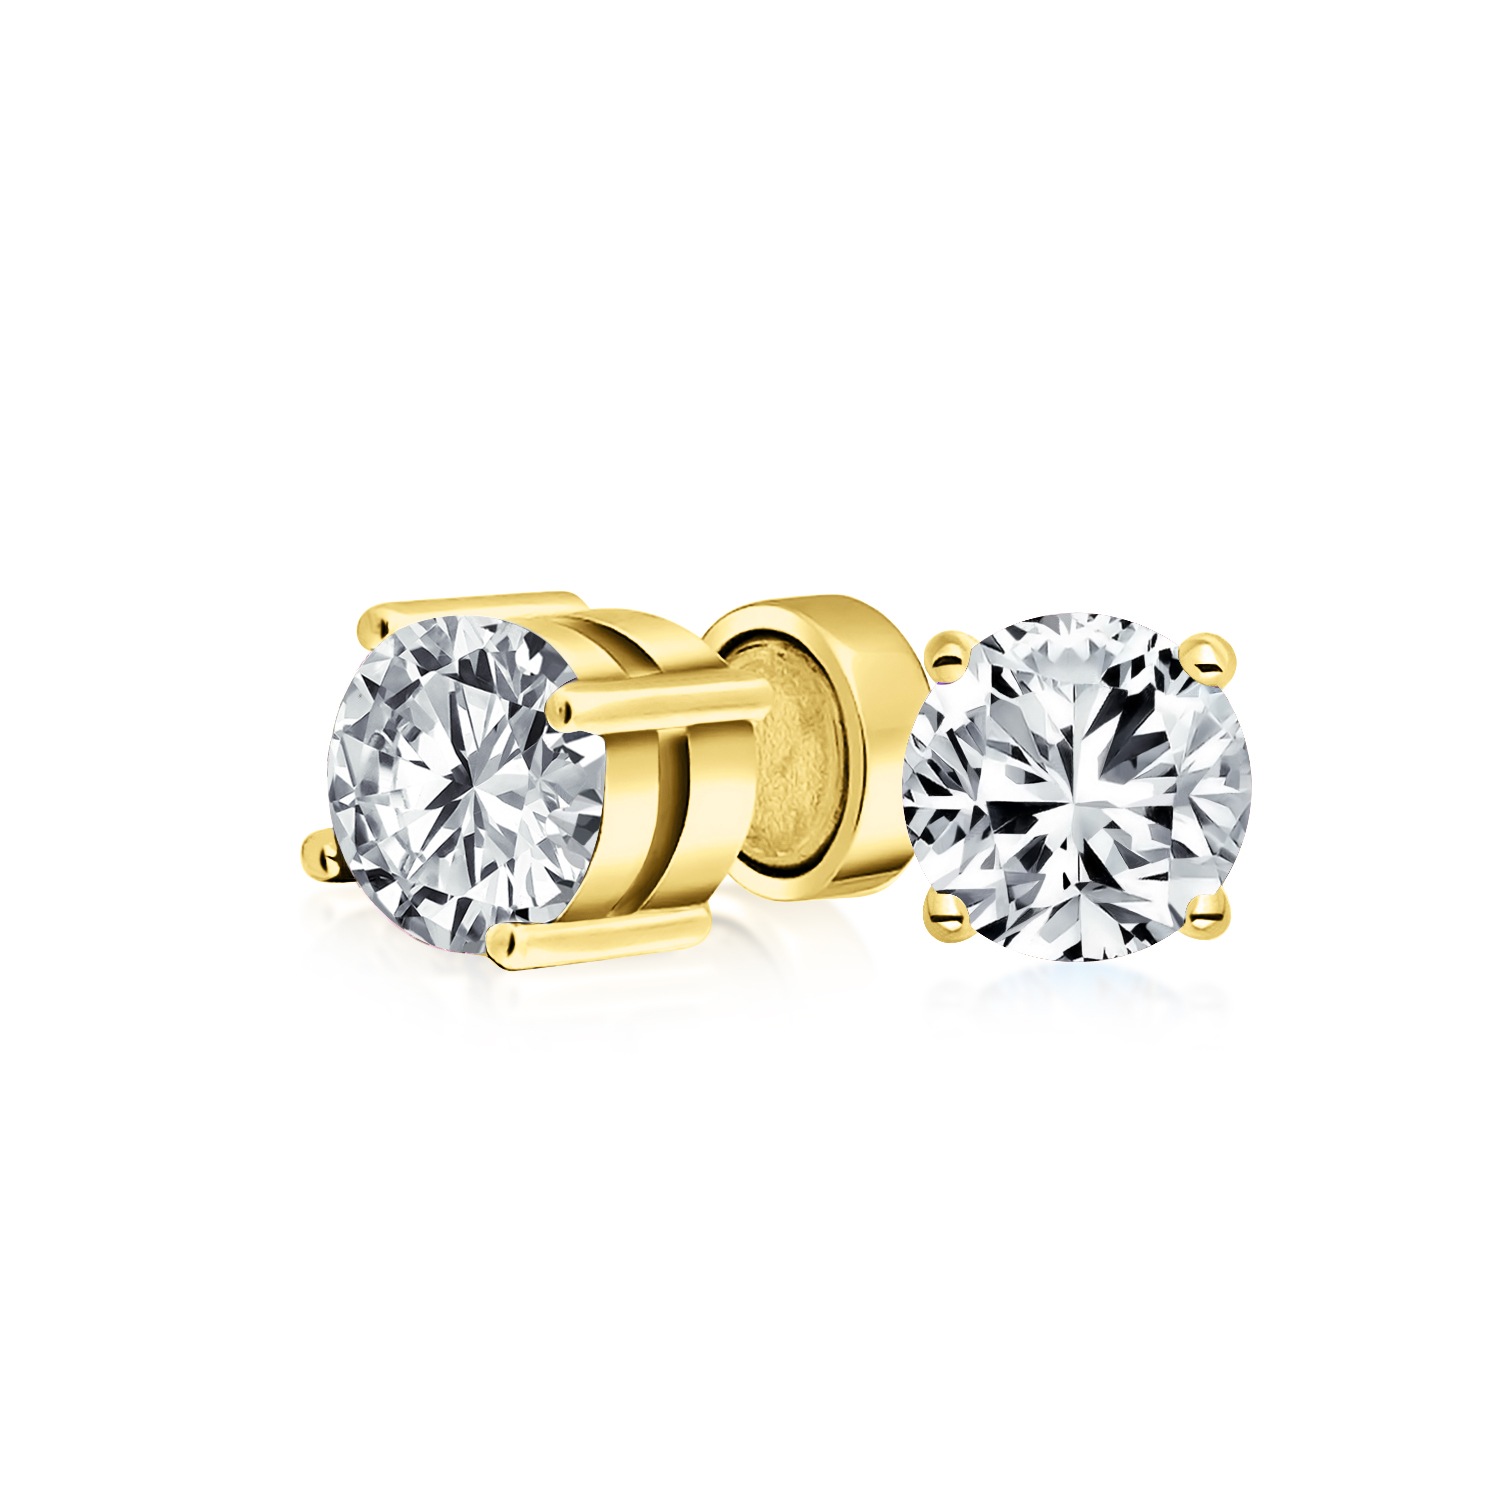 Bling Jewelry 1 CT AAA CZ Solitaire Stud Earrings Clip On Magnetic Gold Plated - image 1 of 4